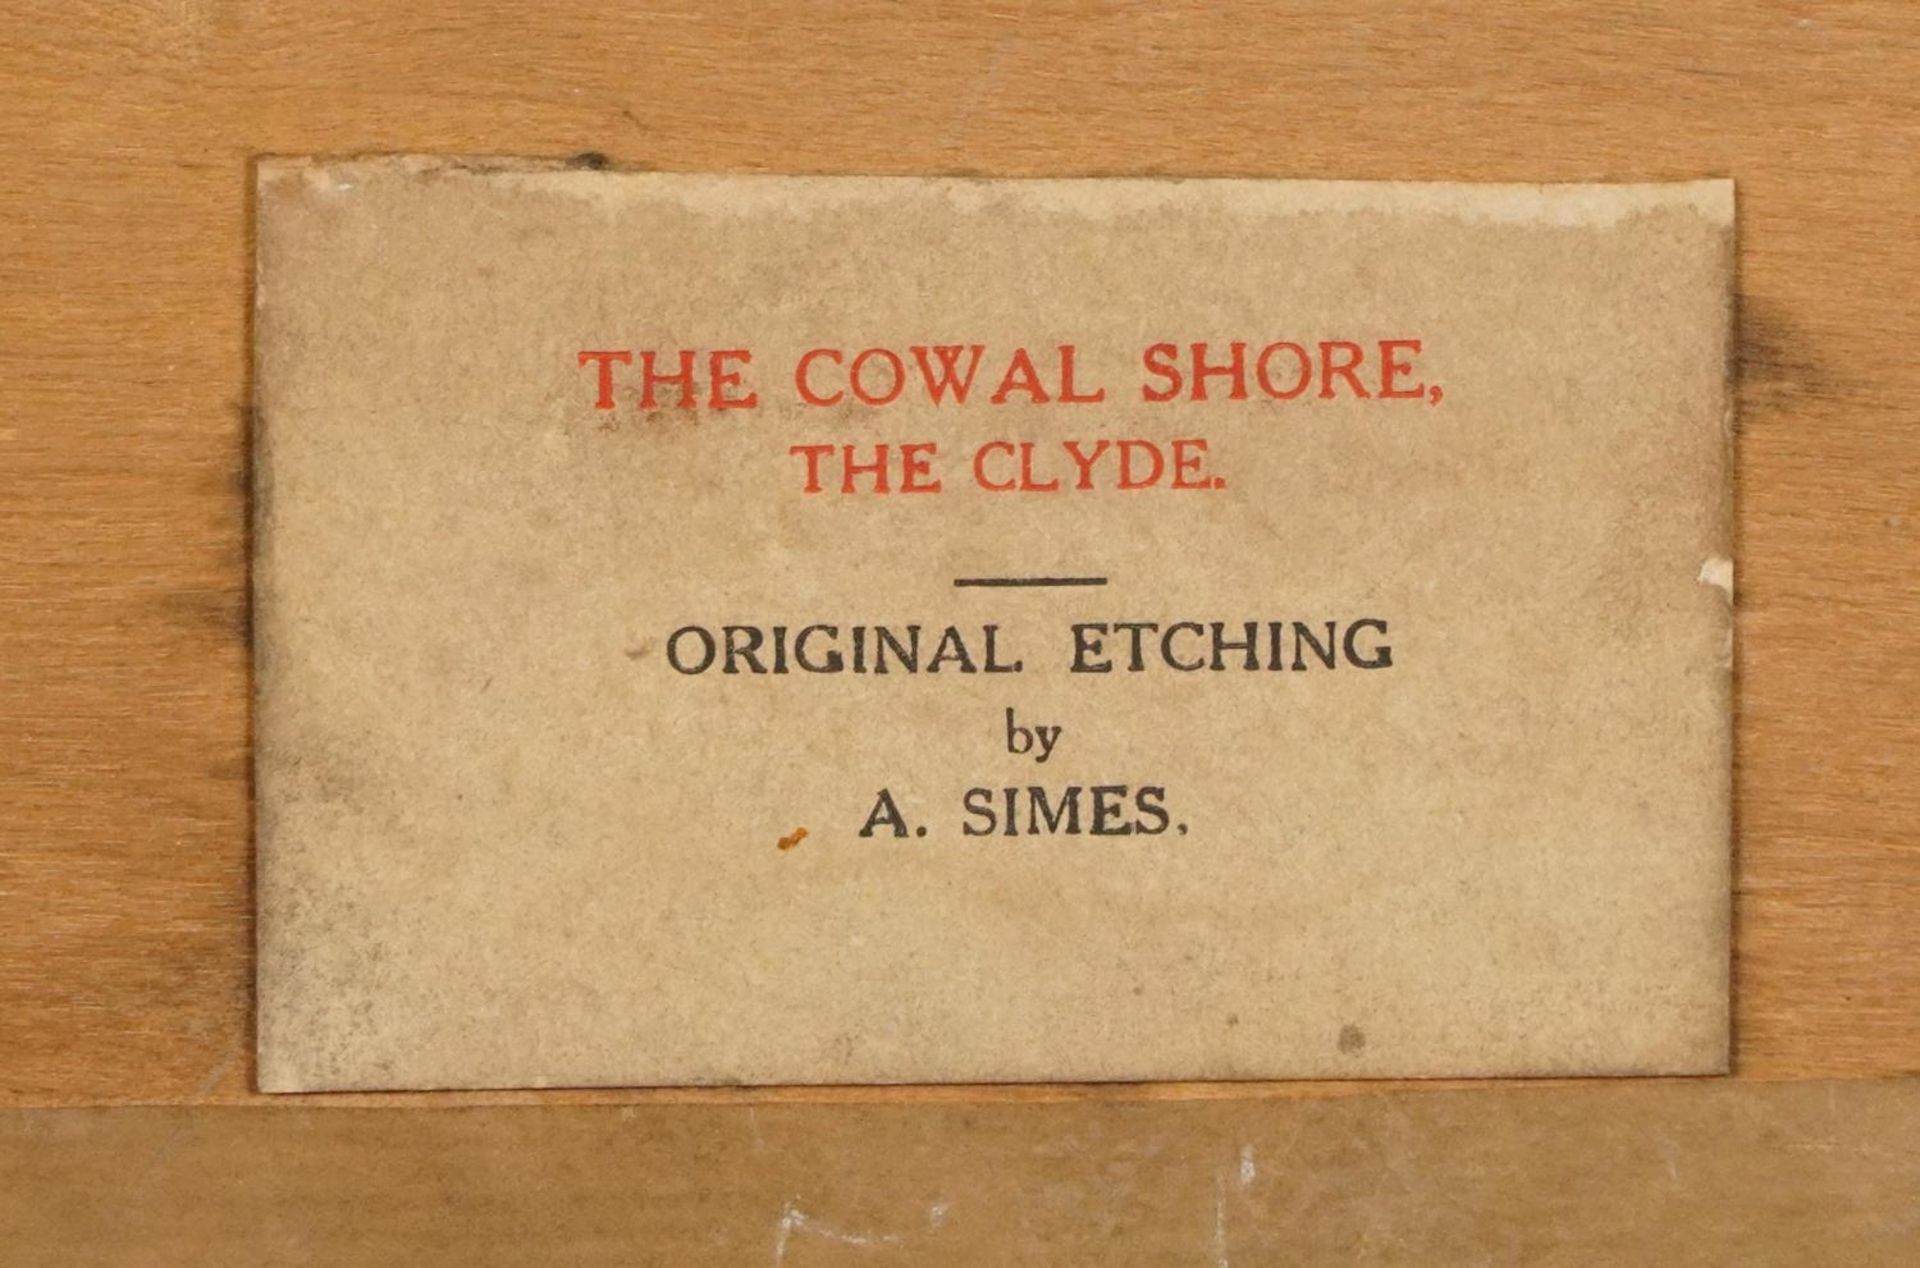 A Simes - The Cowal Shore, The Clyde and Inverness Castle Scotland, pair of pencil signed - Image 11 of 22